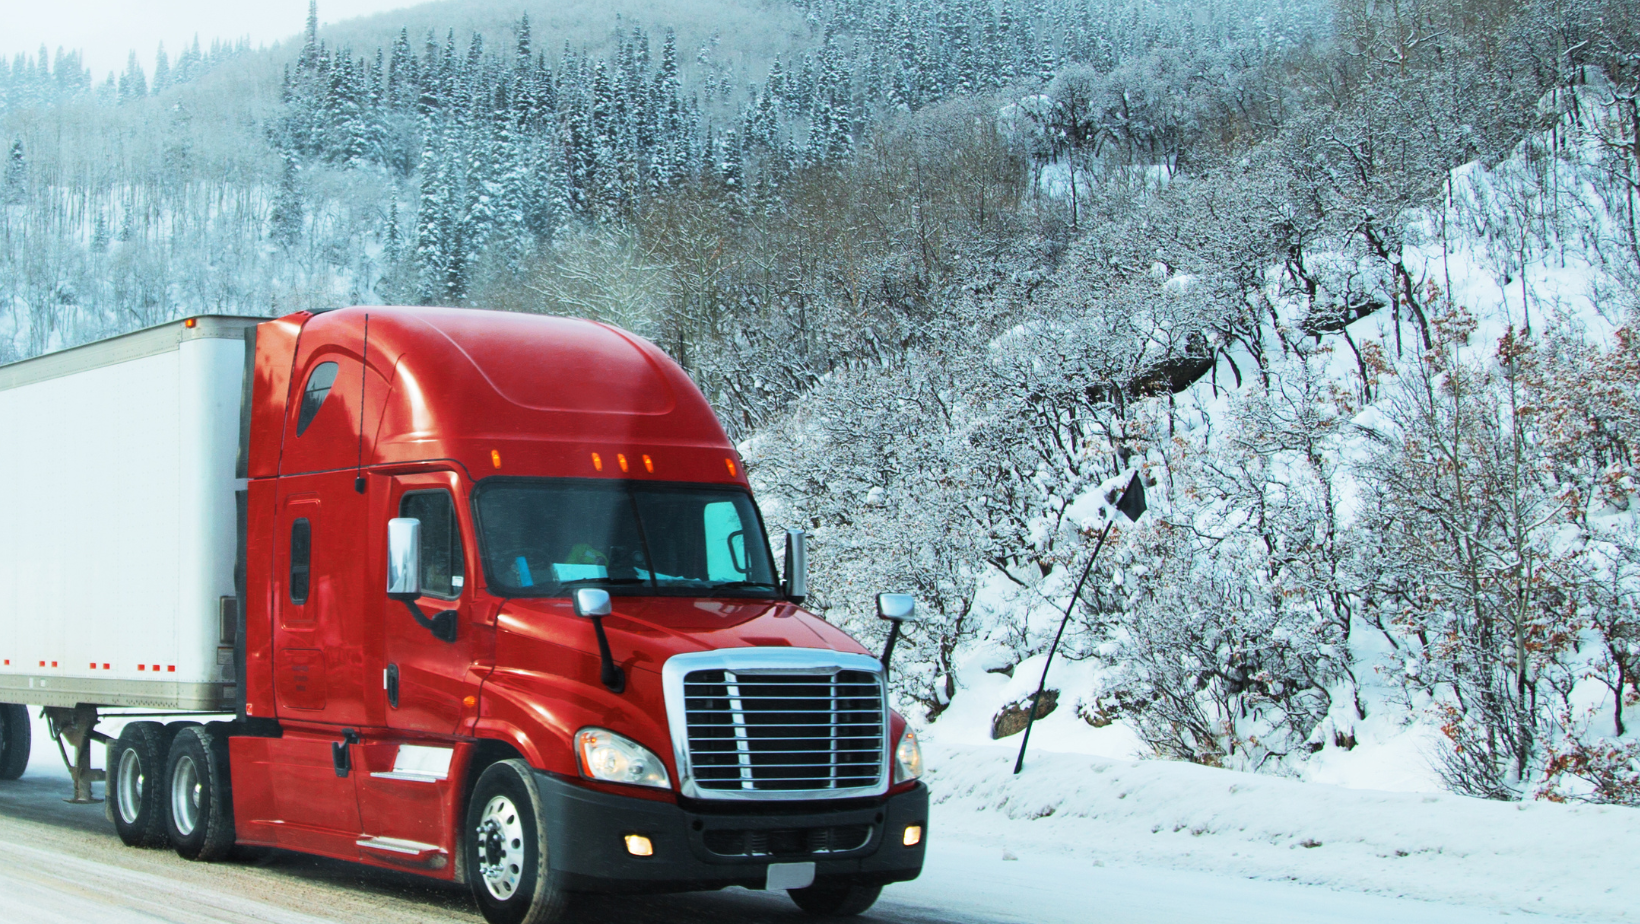 trucking holidays tips for truck drivers in canada united states us and mexico for christmas and holidays